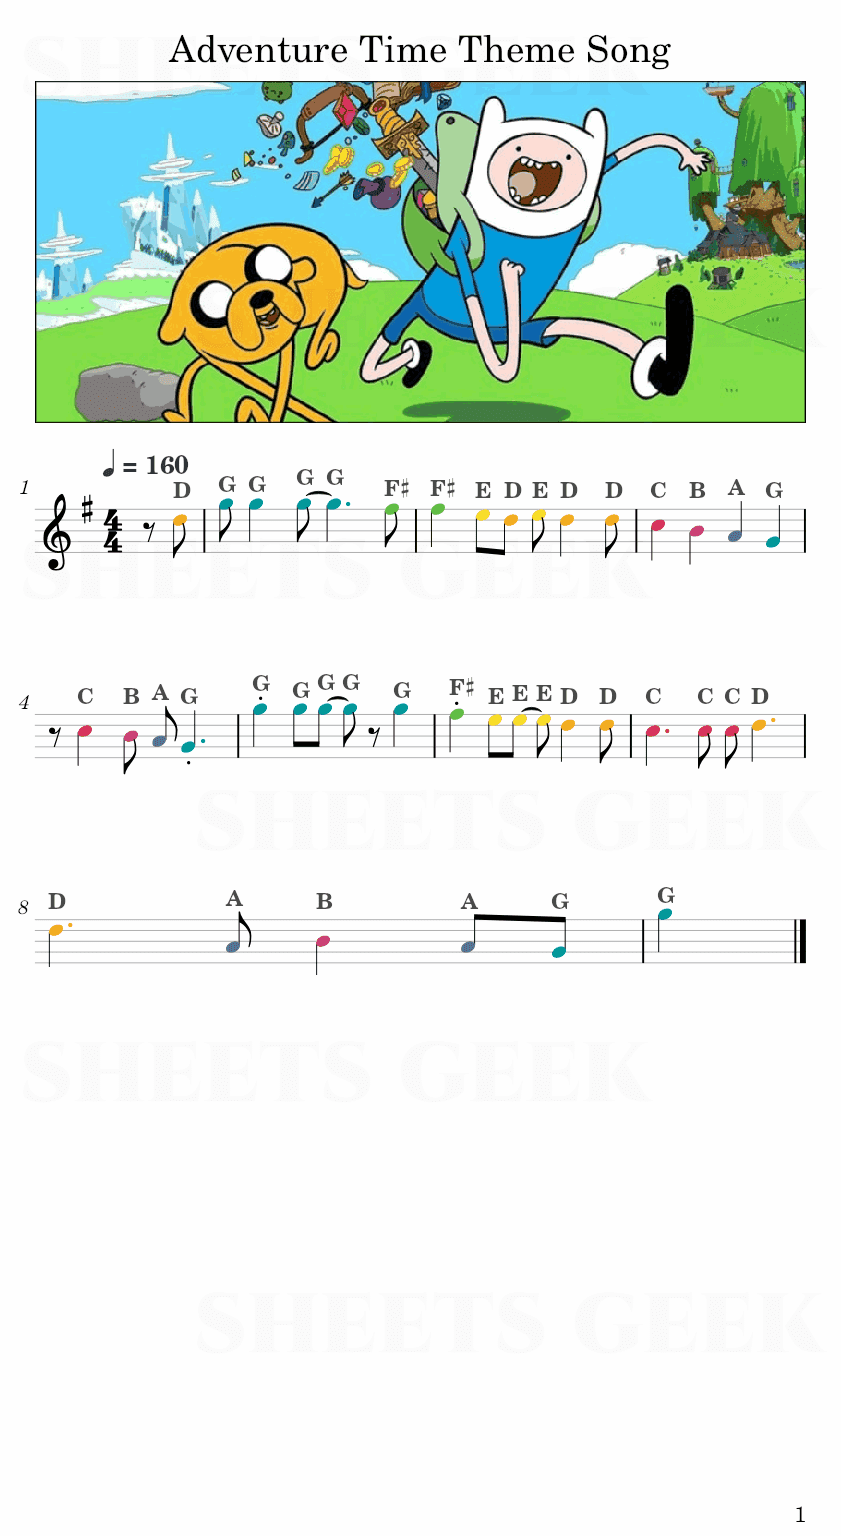 Adventure Time Theme Song Easy Sheet Music Free for piano, keyboard, flute, violin, sax, cello page 1